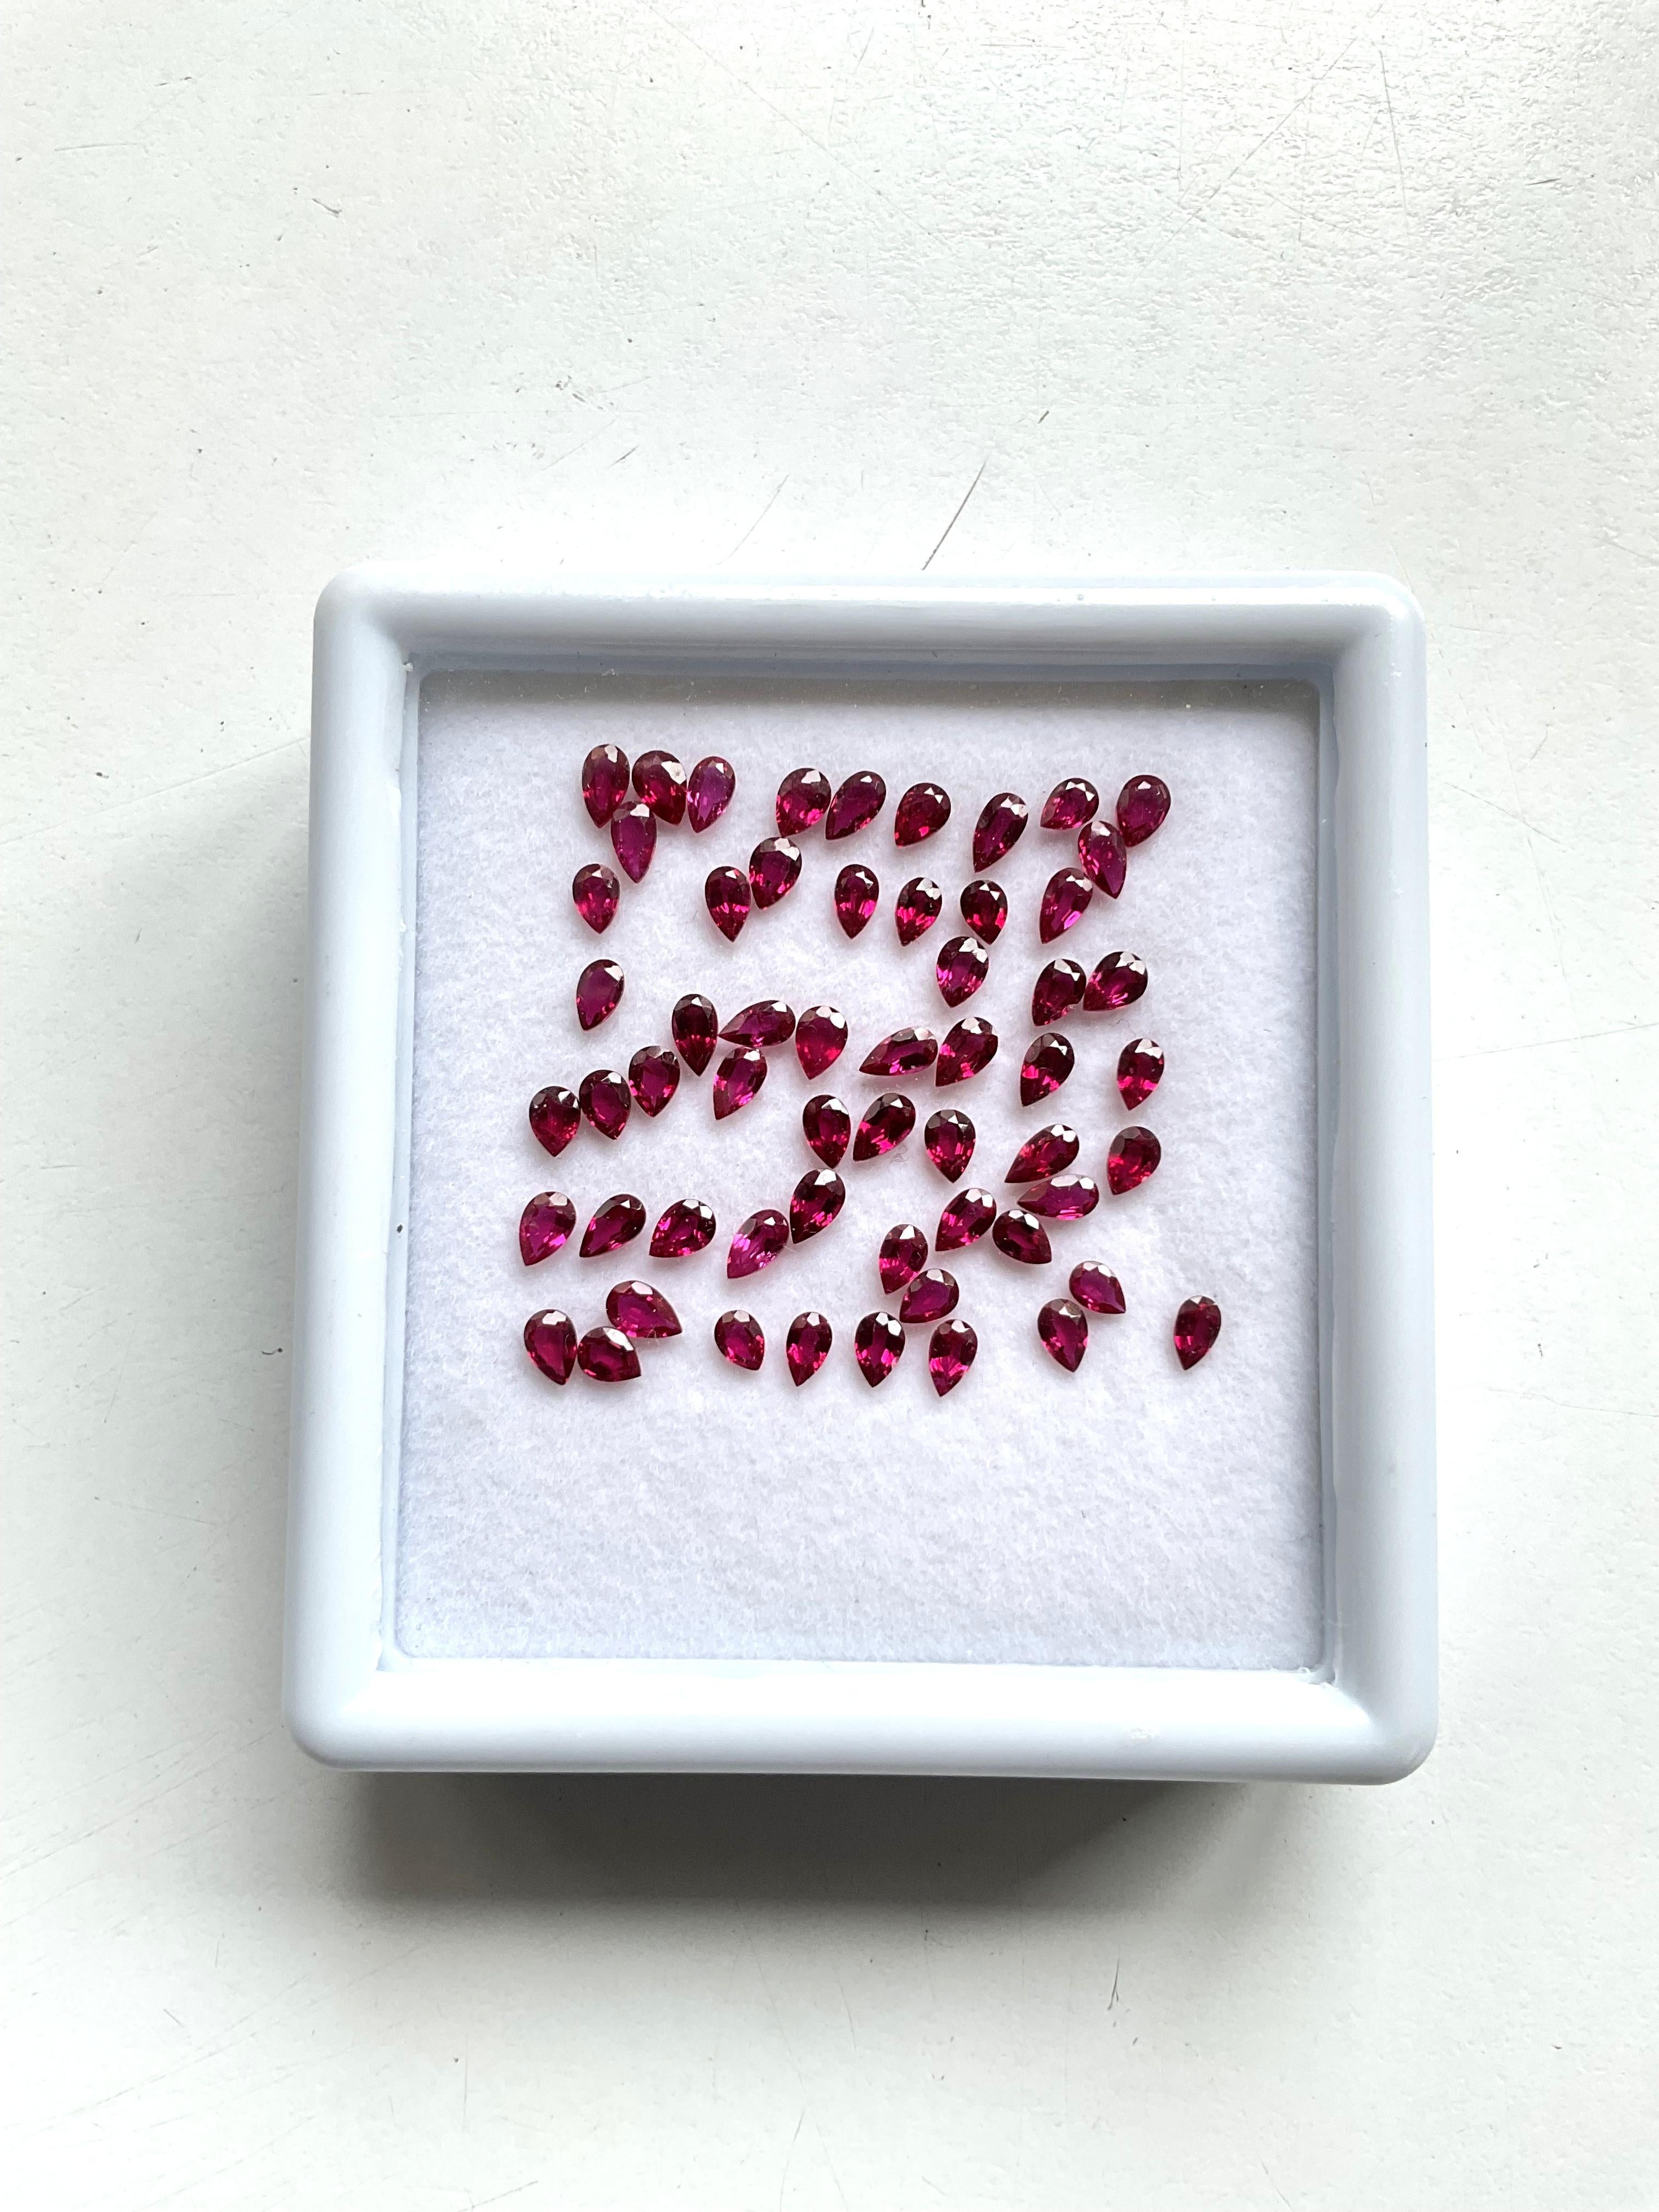 8.21 Carats Mozambique Ruby Top Quality Pear Cut stone No Heat Natural Gemstone

Weight: 8.21 Carats
Size: 3.50x2.50 to 4.5x2.50 MM
Pieces: 58
Shape: Faceted pear cut stone